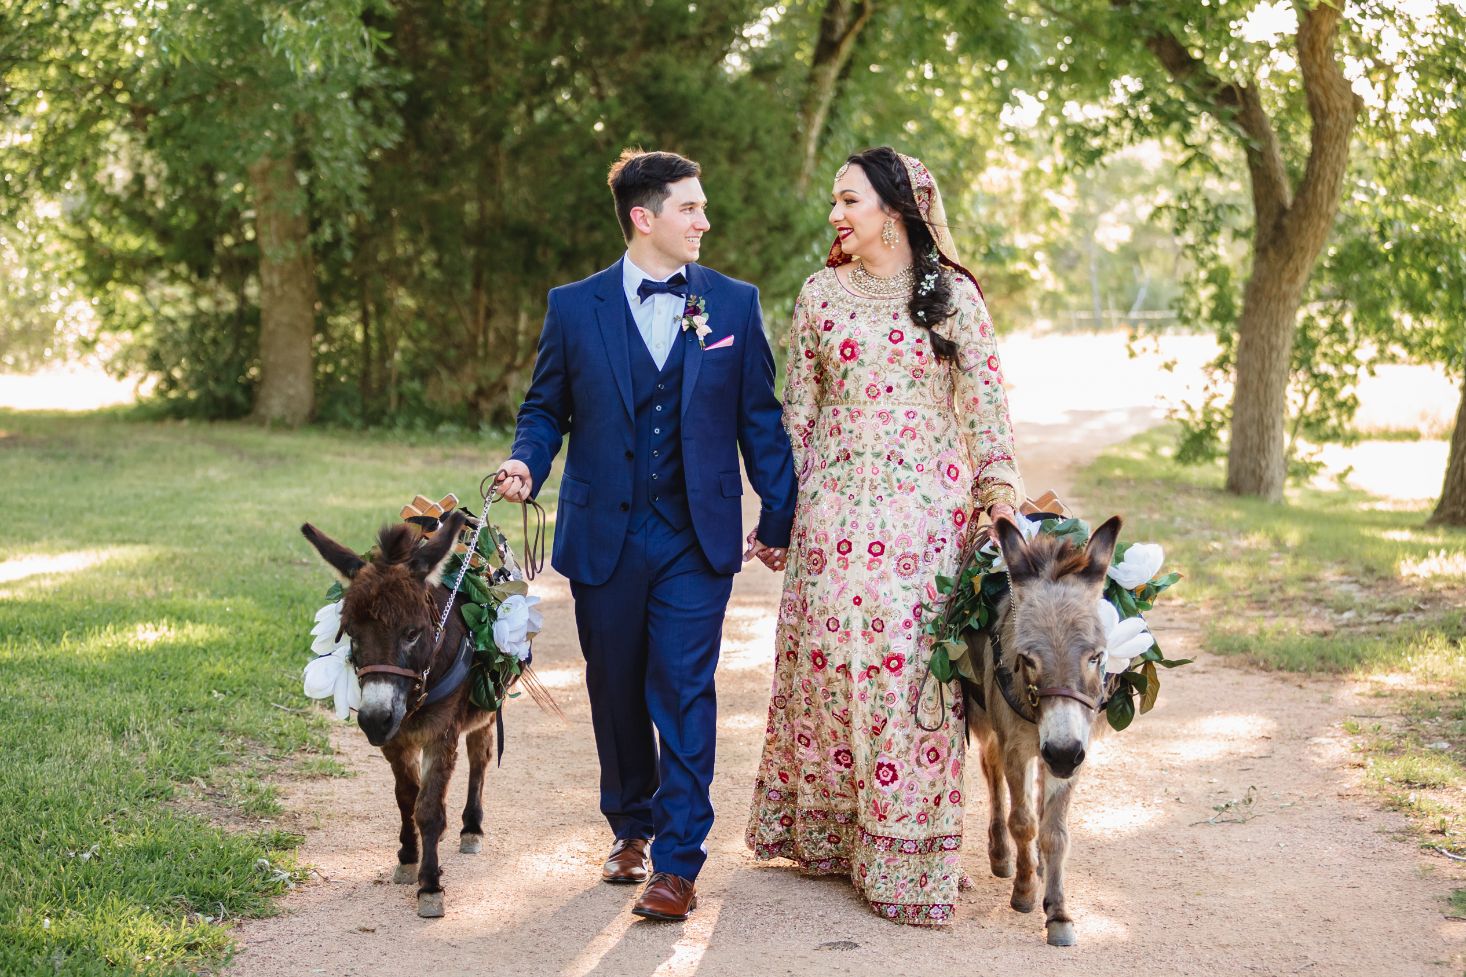 Groom and bride are walking on a dirt path with two donkeys. Groom is wearing a blue suit and smiling at his bride wearing ethnic bridal garments. Green tress and grass in the background of Pecan Springs Ranch wedding venue.